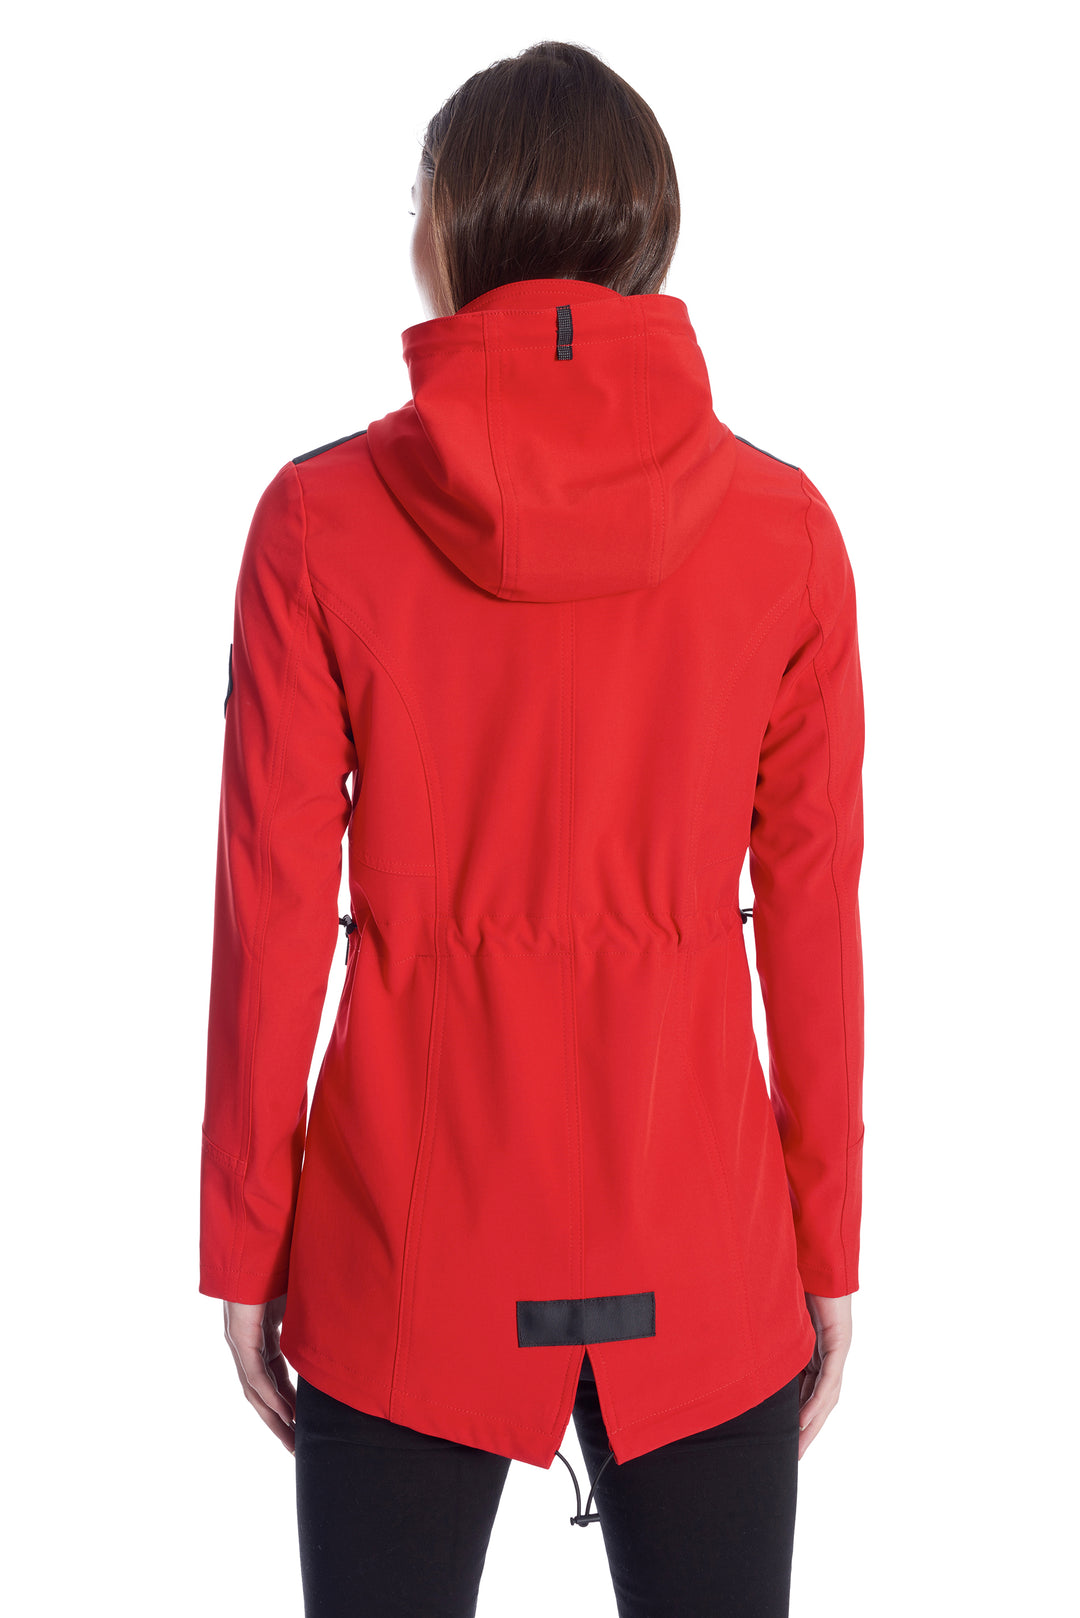 WOMEN'S RED LINED SOFTSHELL